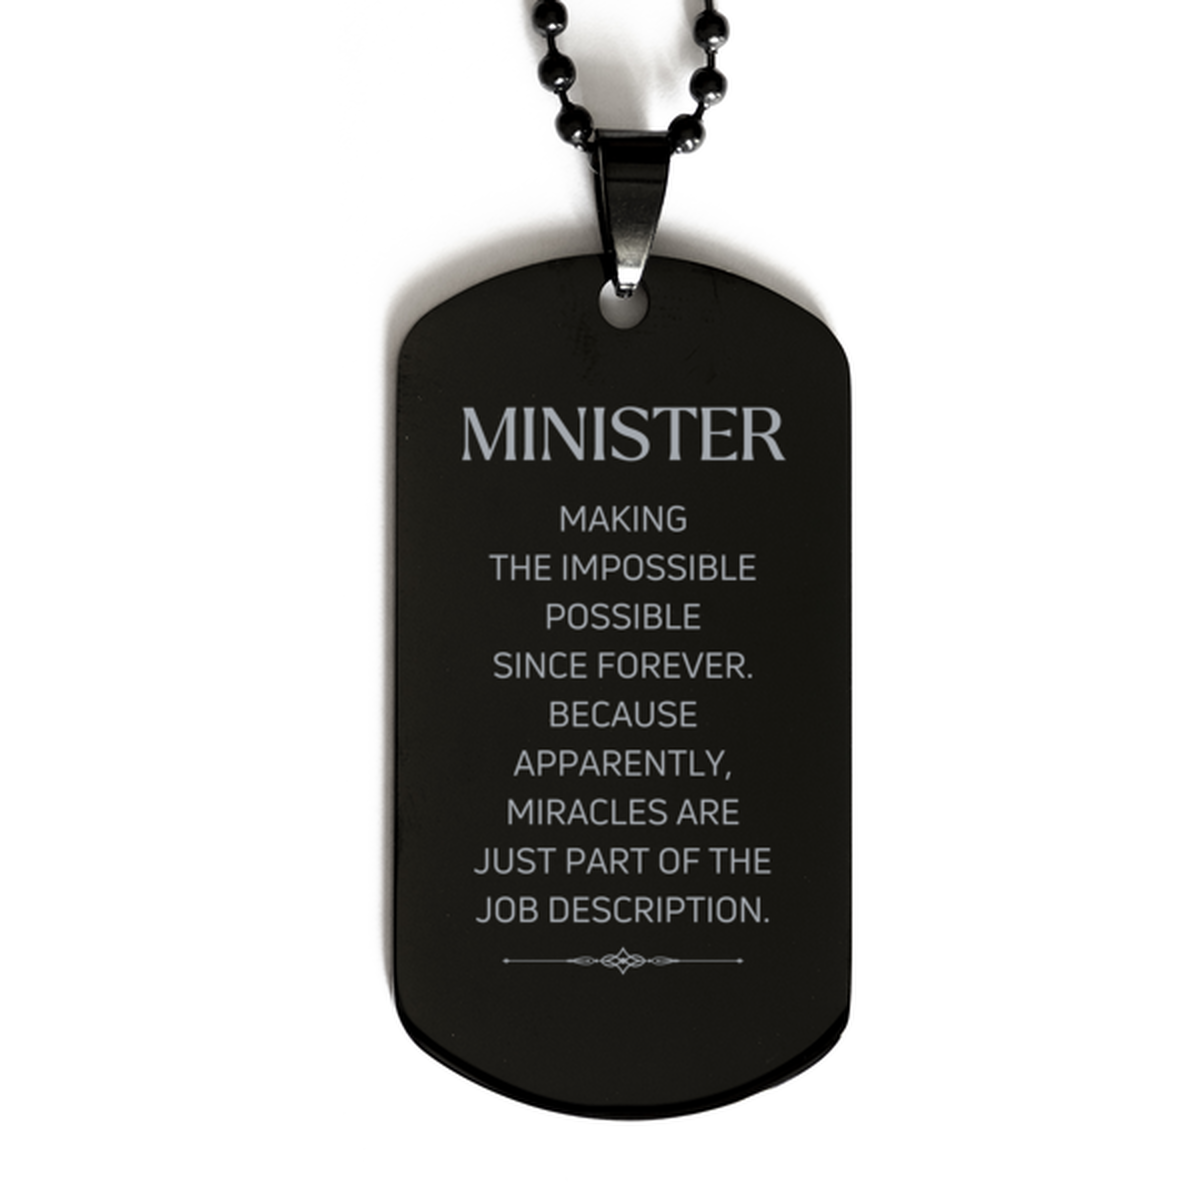 Funny Minister Gifts, Miracles are just part of the job description, Inspirational Birthday Black Dog Tag For Minister, Men, Women, Coworkers, Friends, Boss